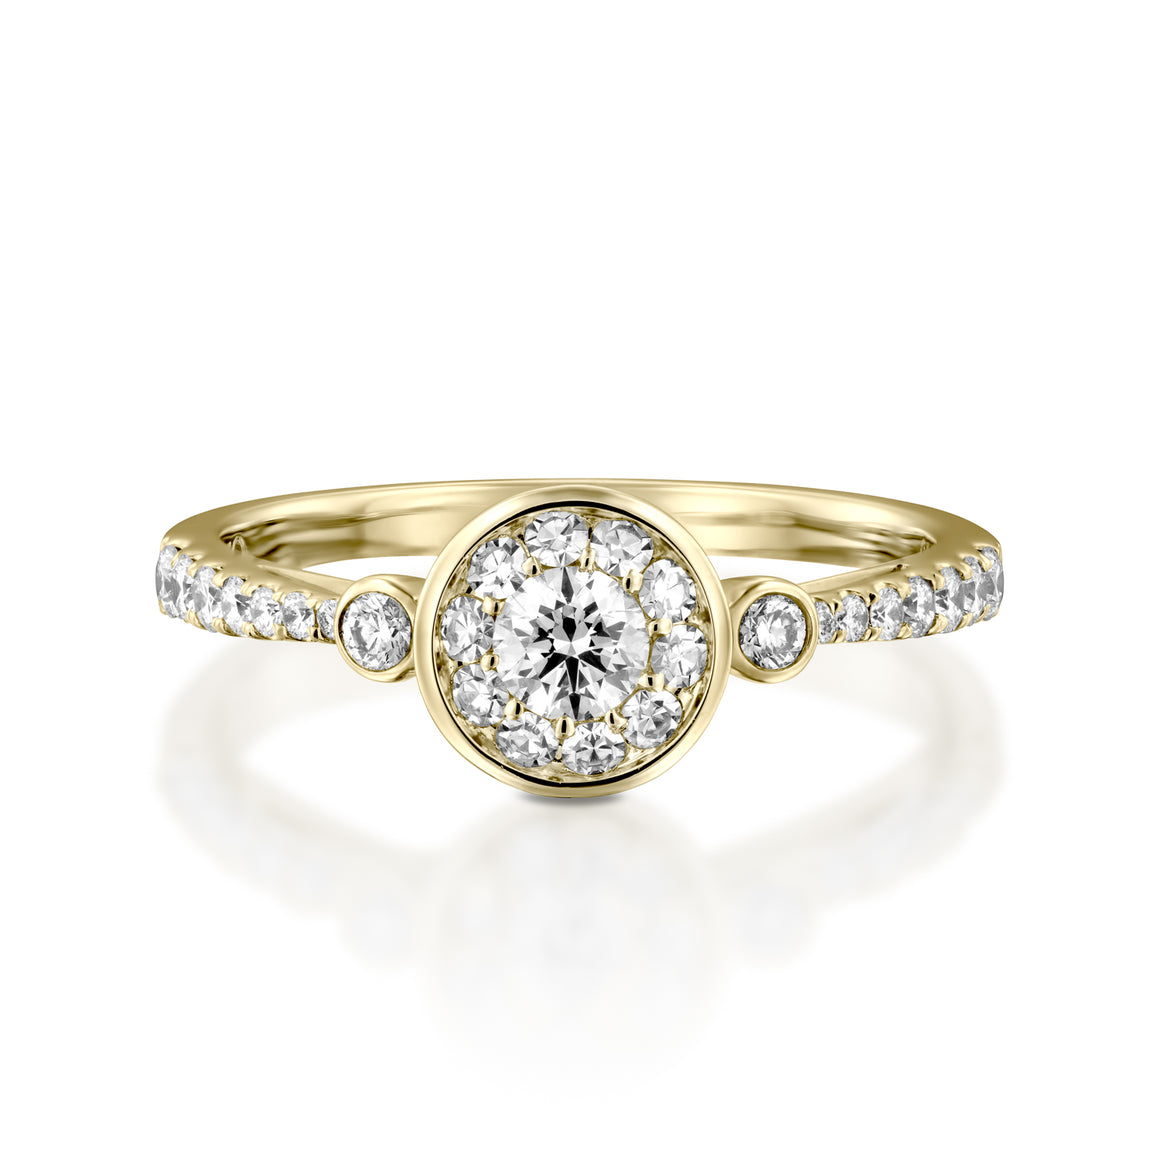 RNH564WC-18k  gold Engagement Ring -     Halo Diamond Ring